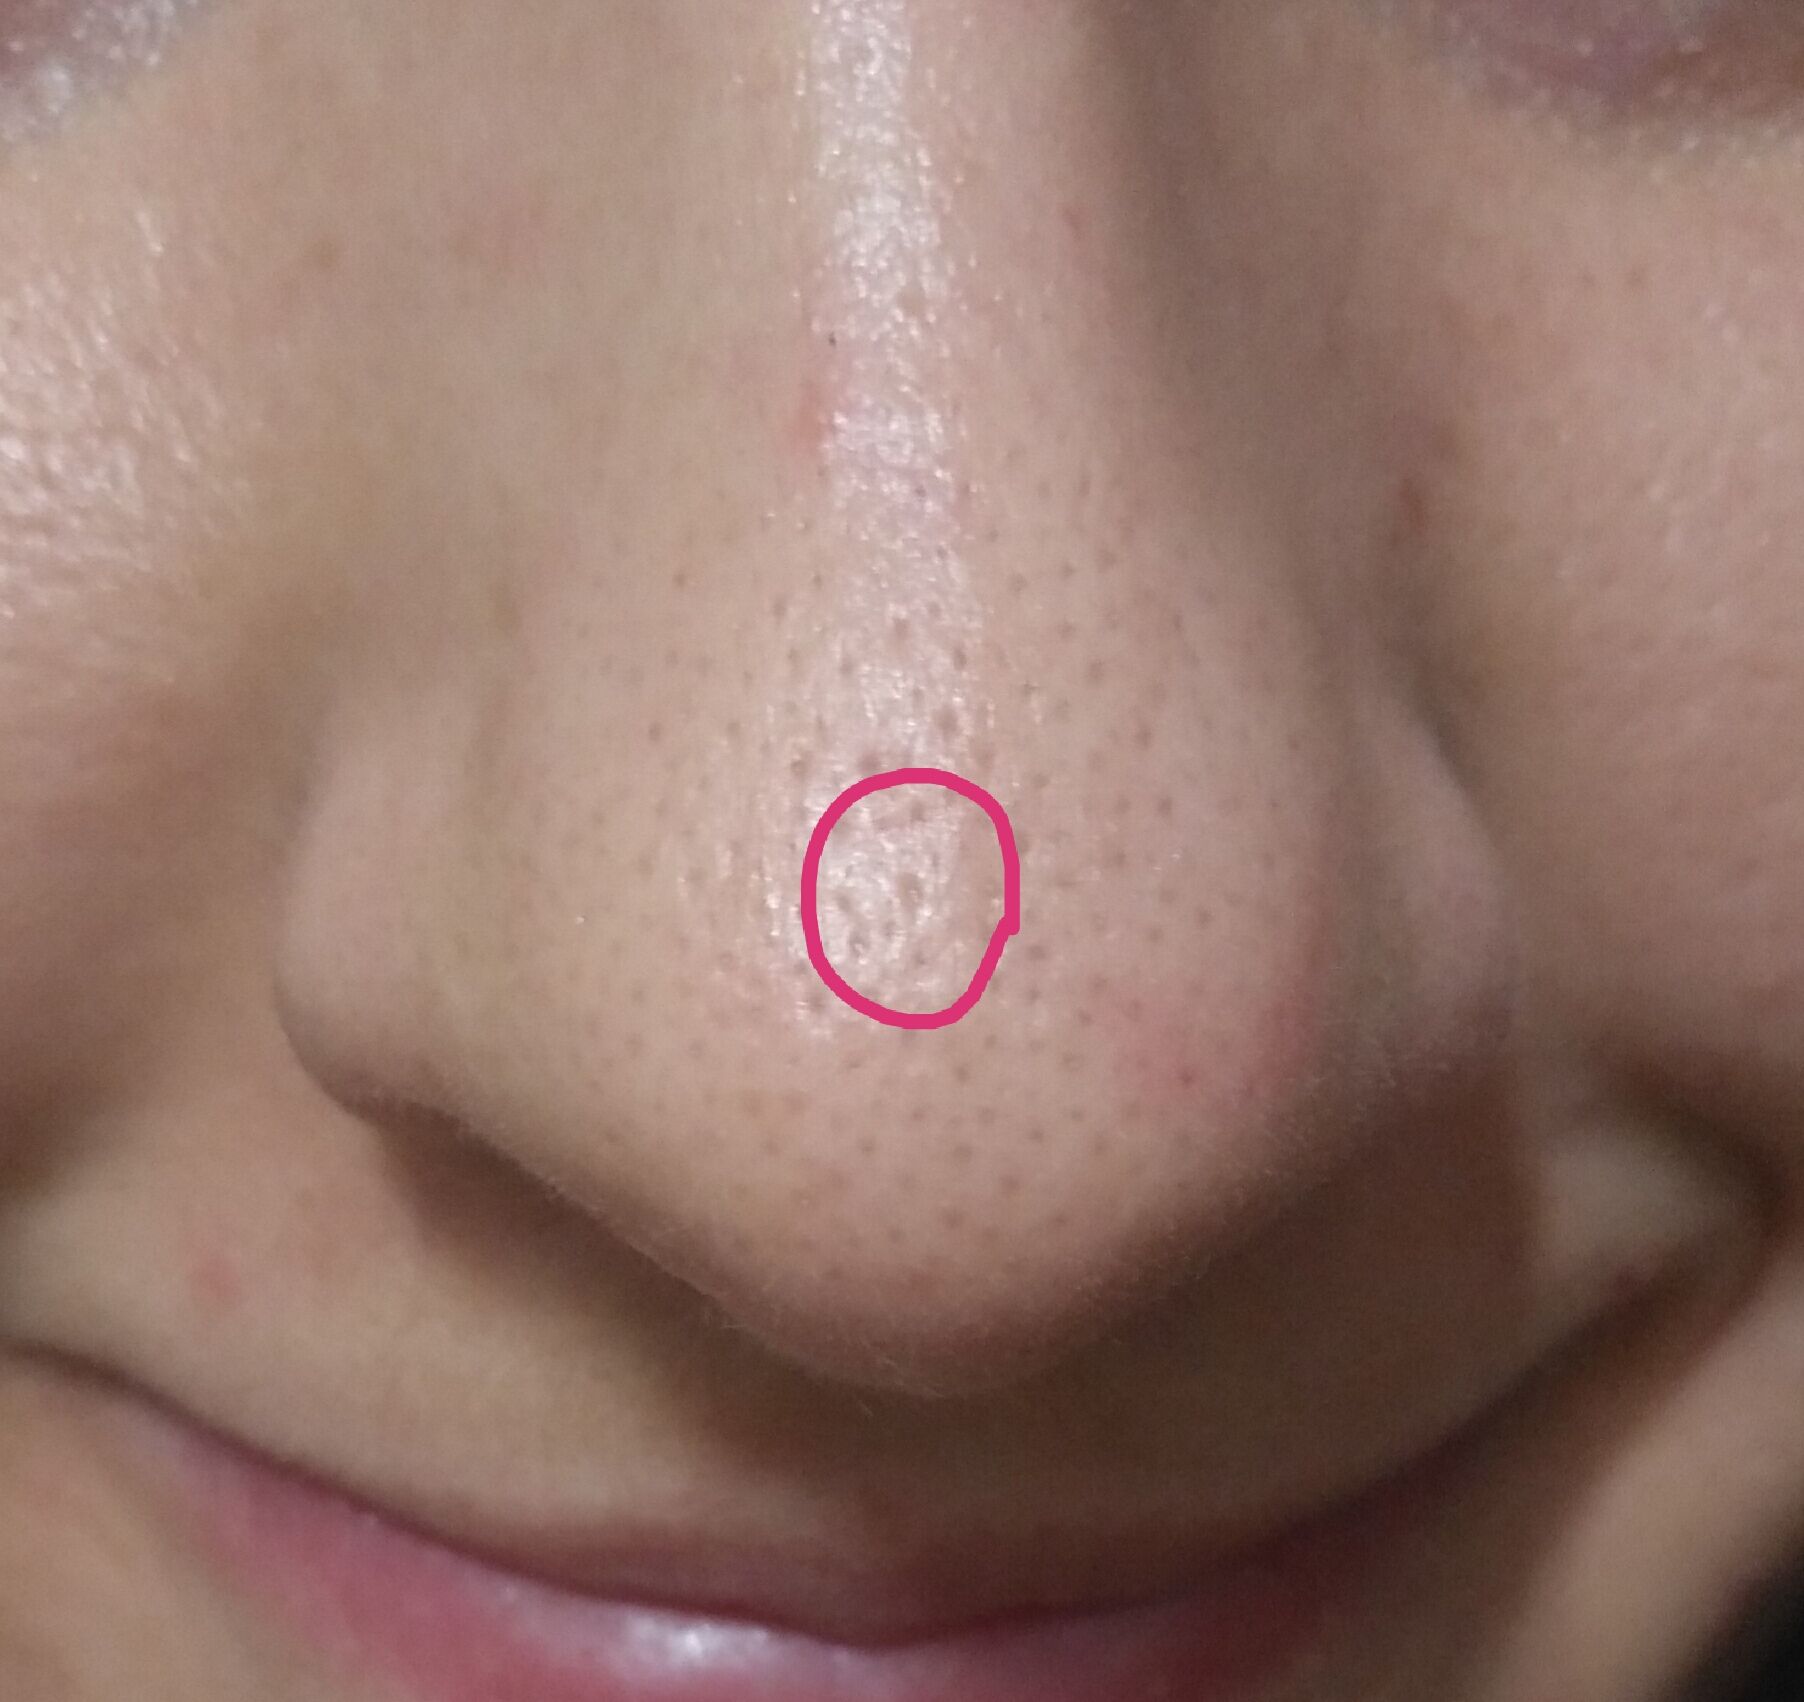 Help Me Indented Scarscarred Pore On The Nose Scar Treatments